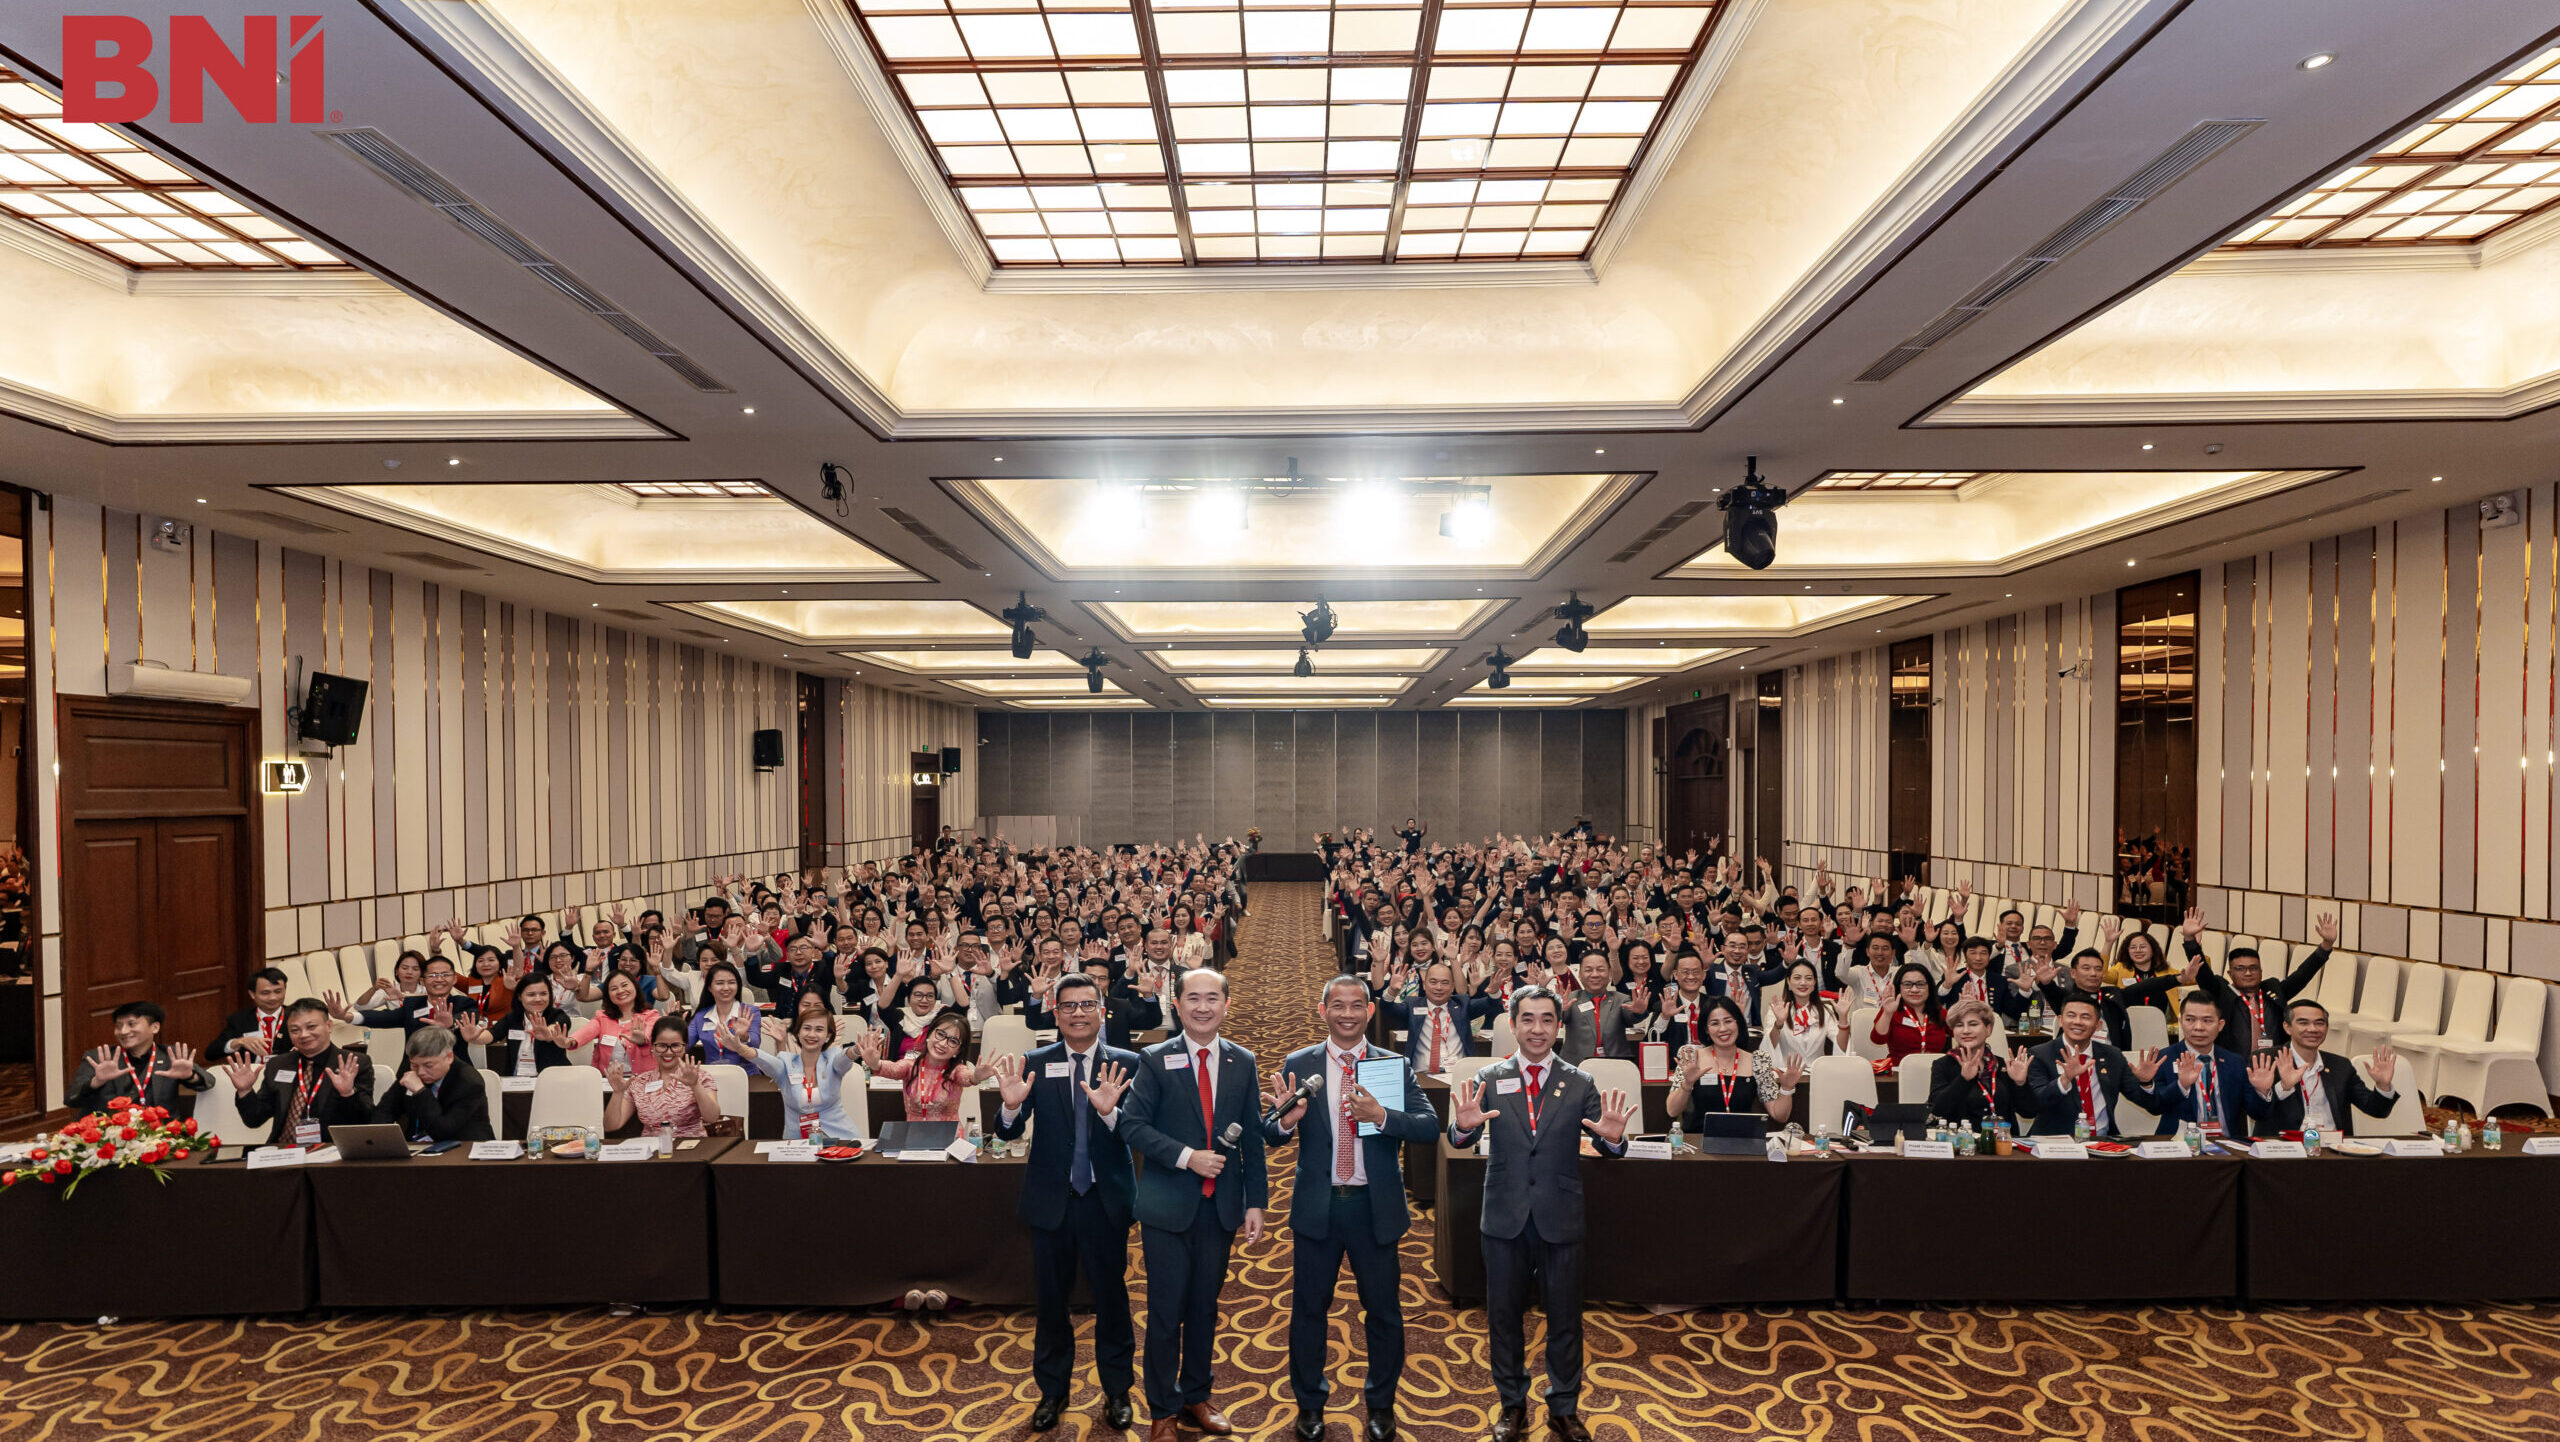 The event gathered nearly 500 outstanding leaders from BNI Vietnam